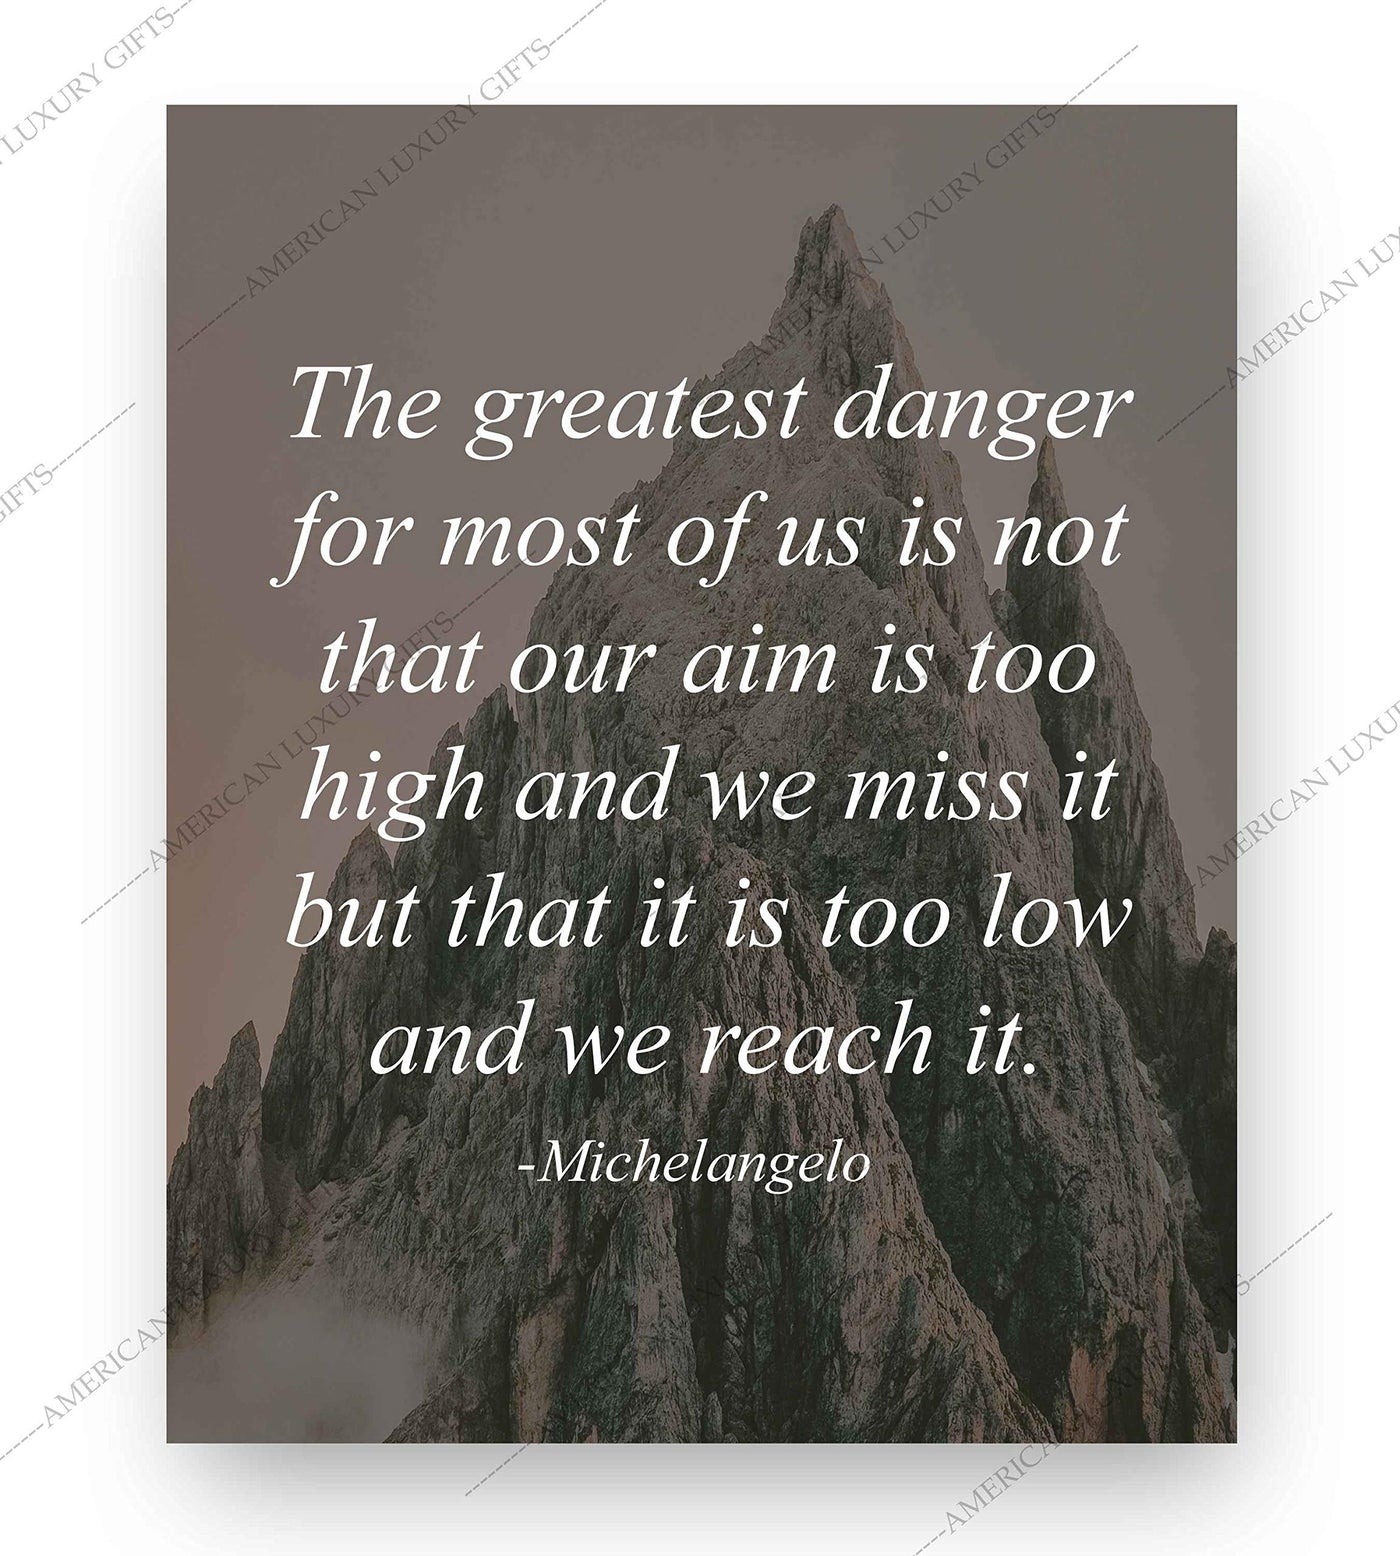 Michelangelo Quotes Wall Art- ?The Greatest Danger for Most of Us? -8 x 10" Motivational Poster Print- Ready to Frame. Home-Office-School-Library Decor. Perfect Gift for Motivation & Inspiration!